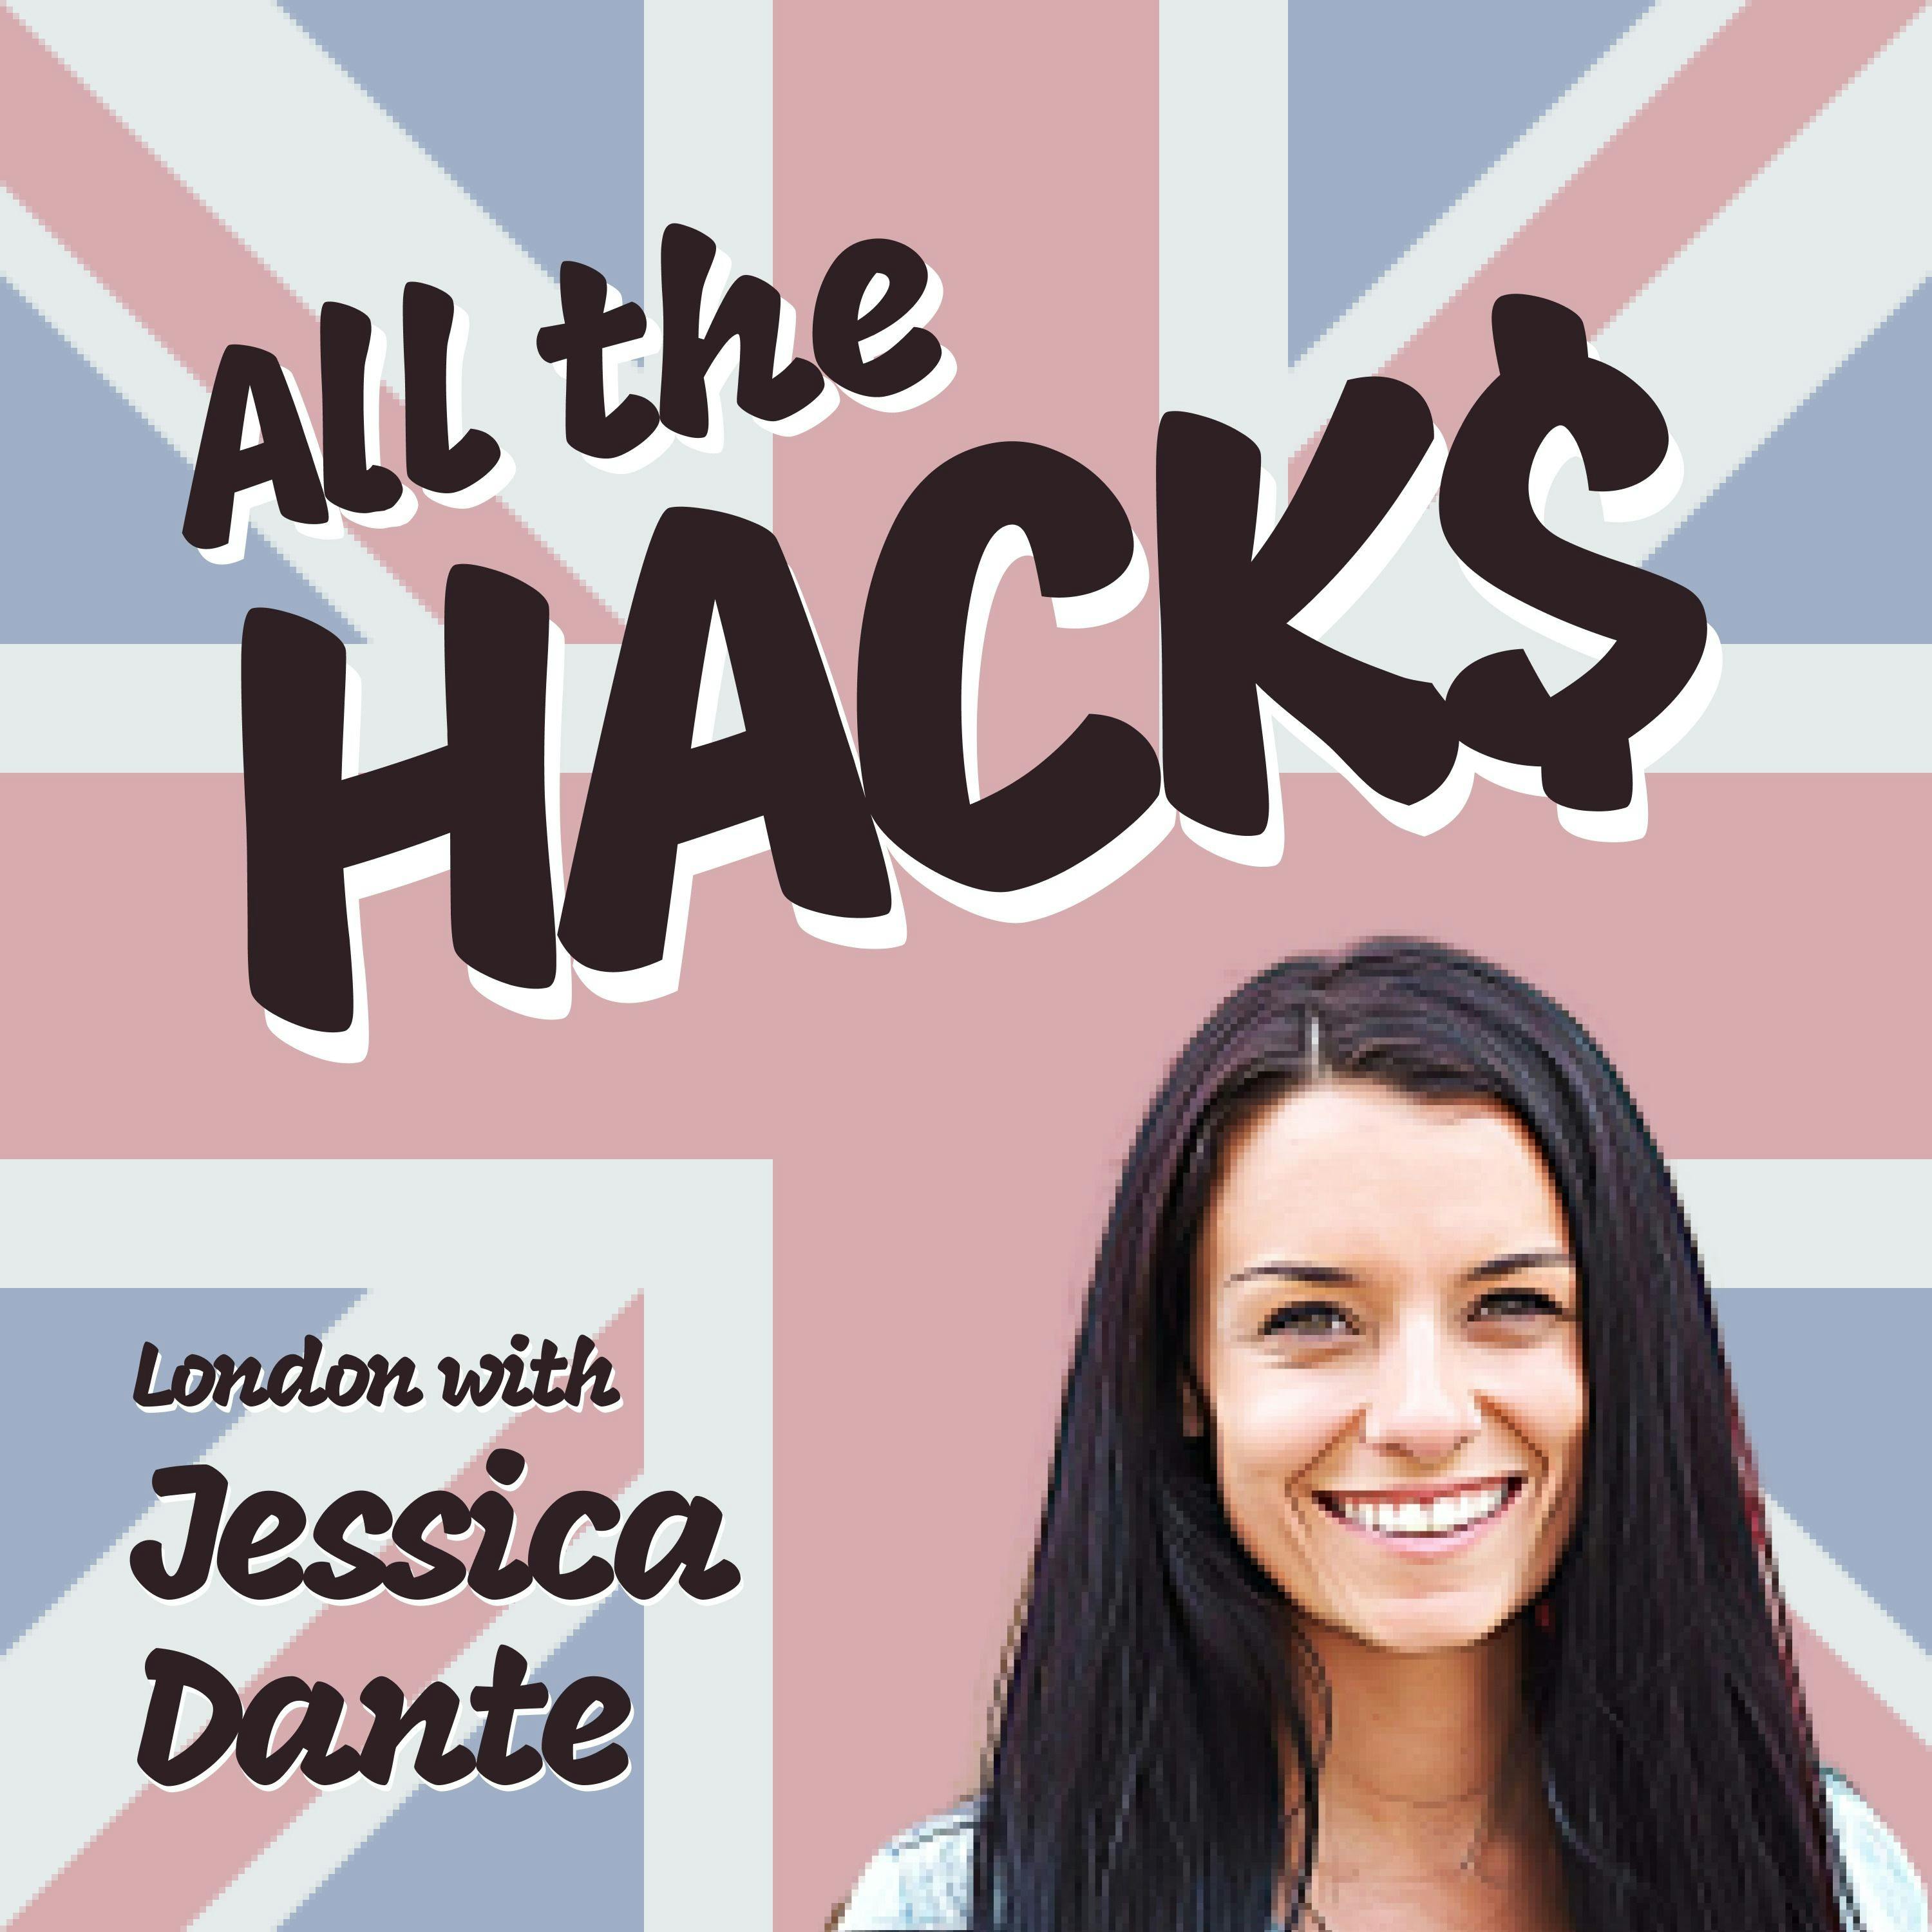 Experience London Like a Local: What to Eat, See, Do & Getting There on Points with Jessica Dante (+ Chris' Trip Report)